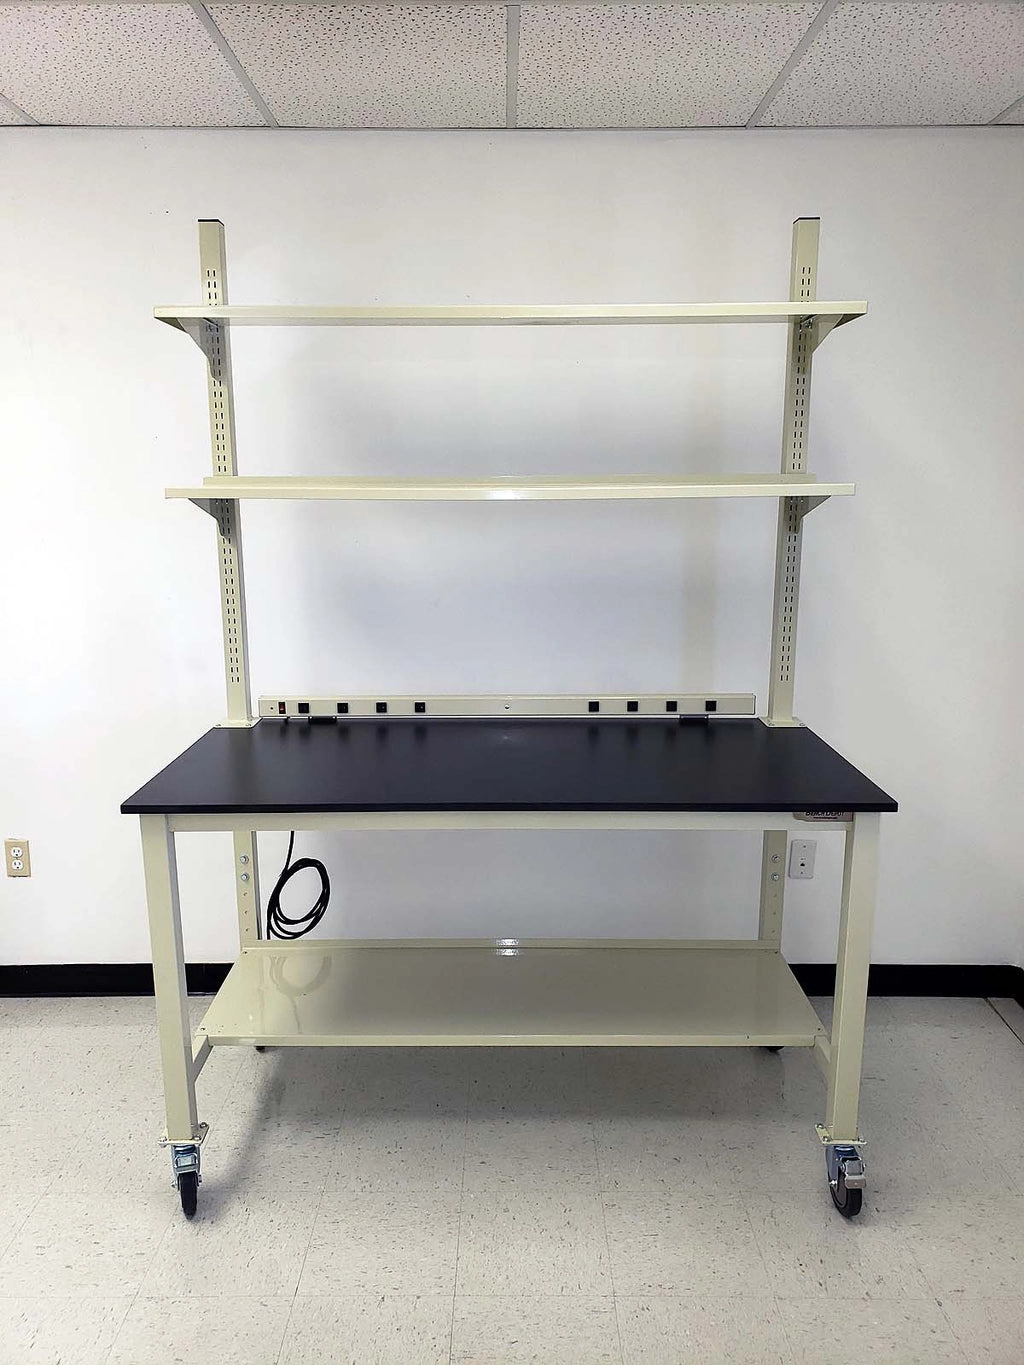 Quick Labs 6 foot heavy duty mobile lab bench with plastic laminate countertop, (2) upper shelves, undercounter shelf, power strip, and casters - adjustable height | QMBH3072-PL